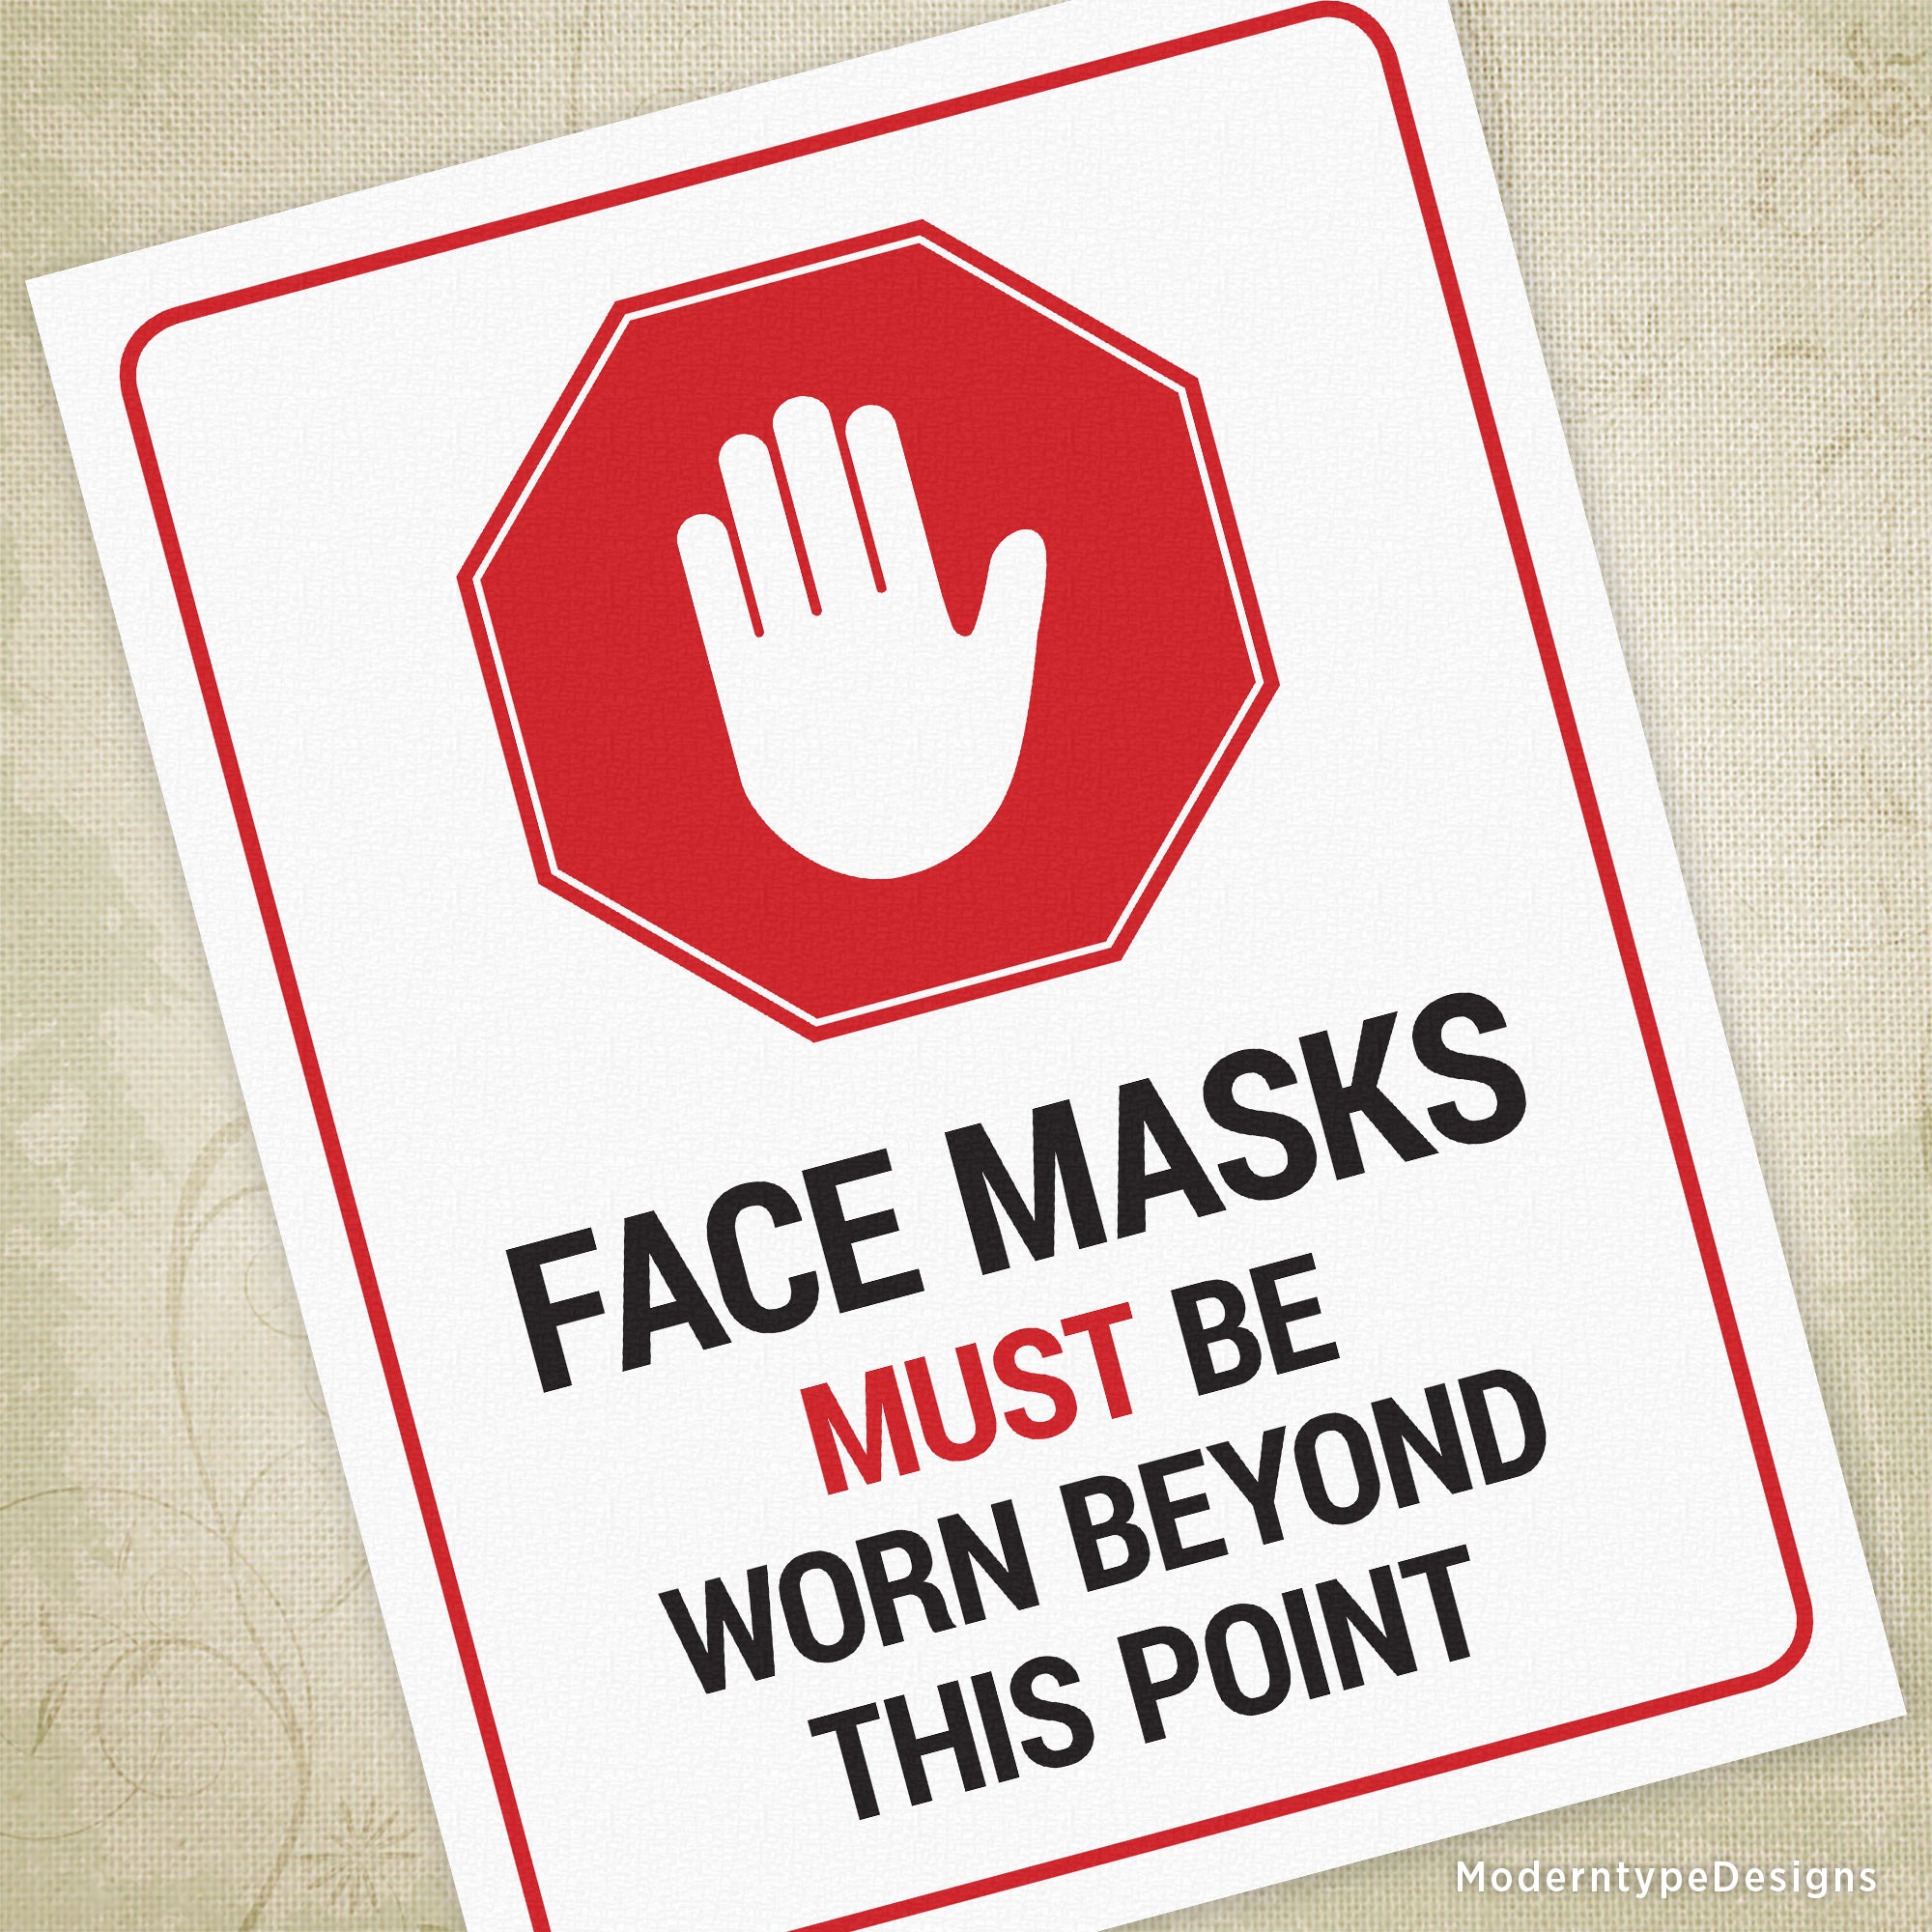 Face Masks Must Be Worn Beyond This Point Printable Sign